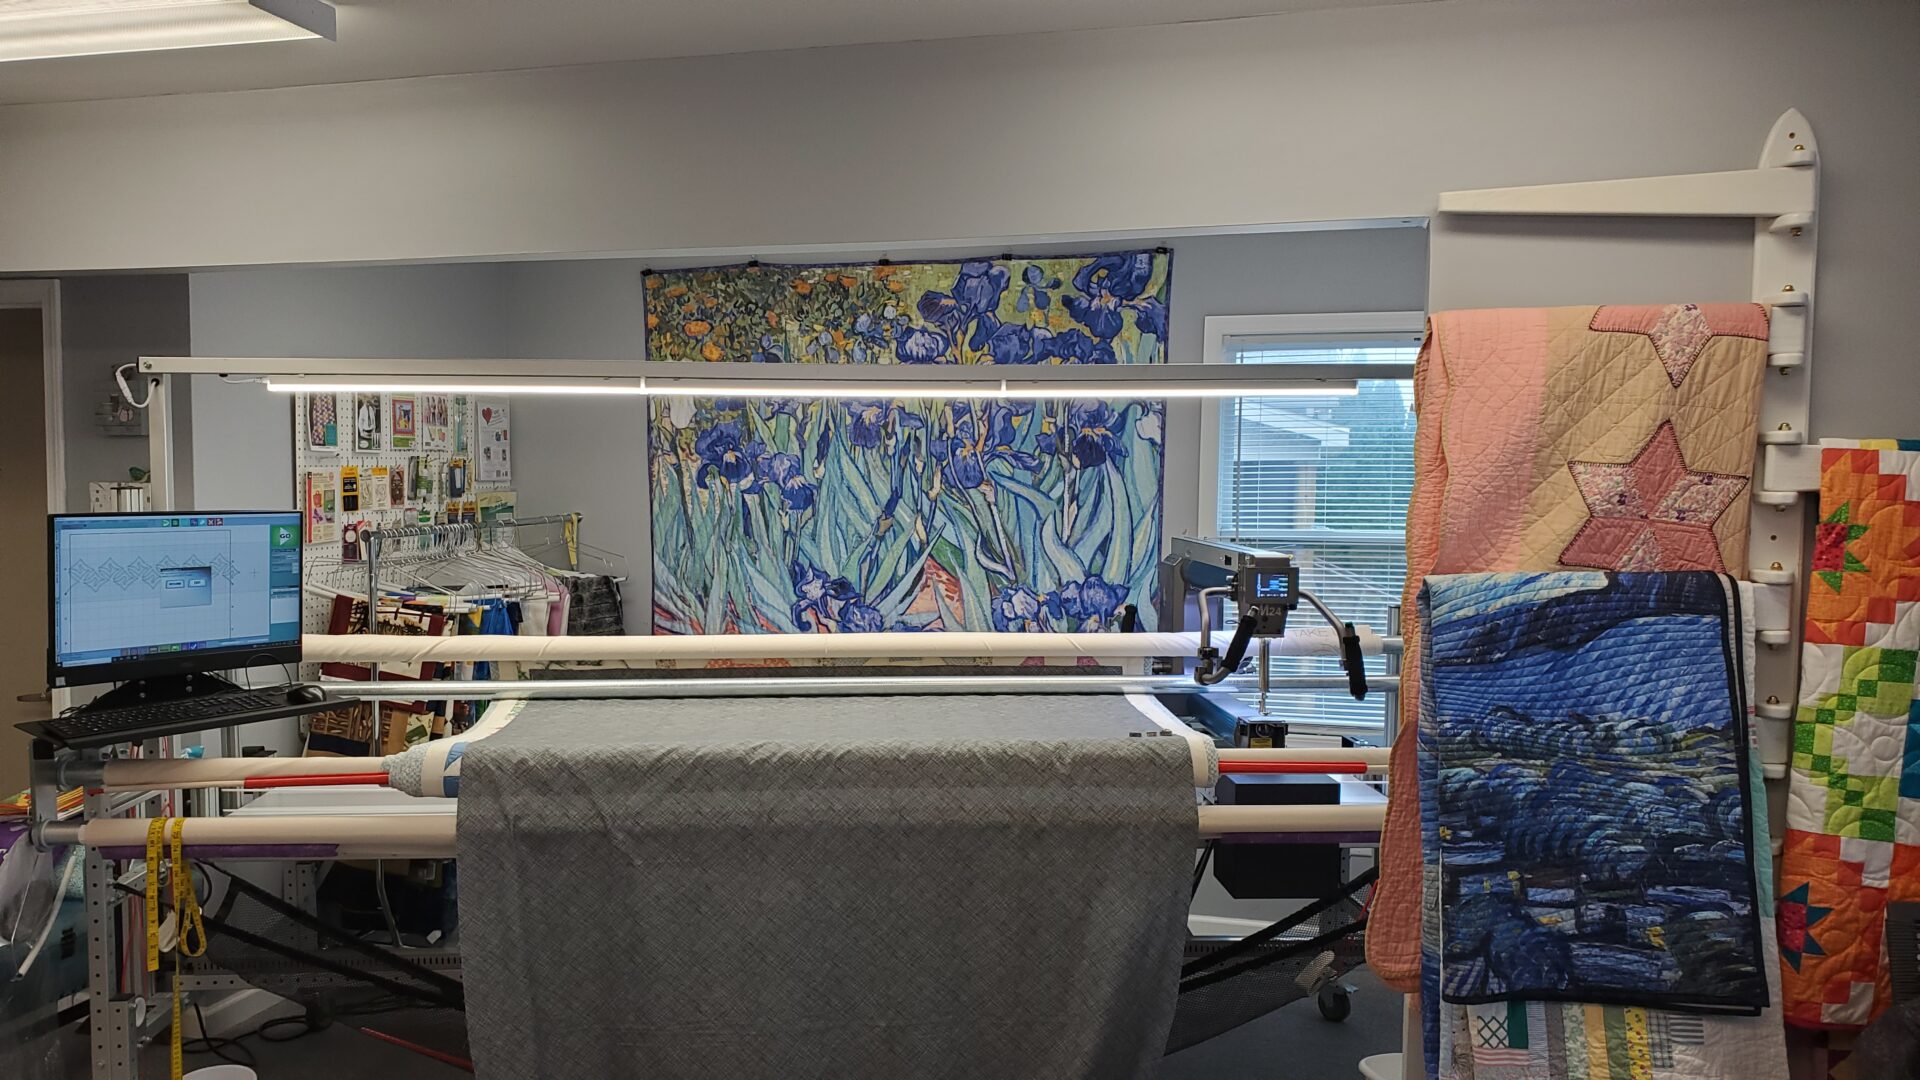 A large machine in a room with a painting on the wall.